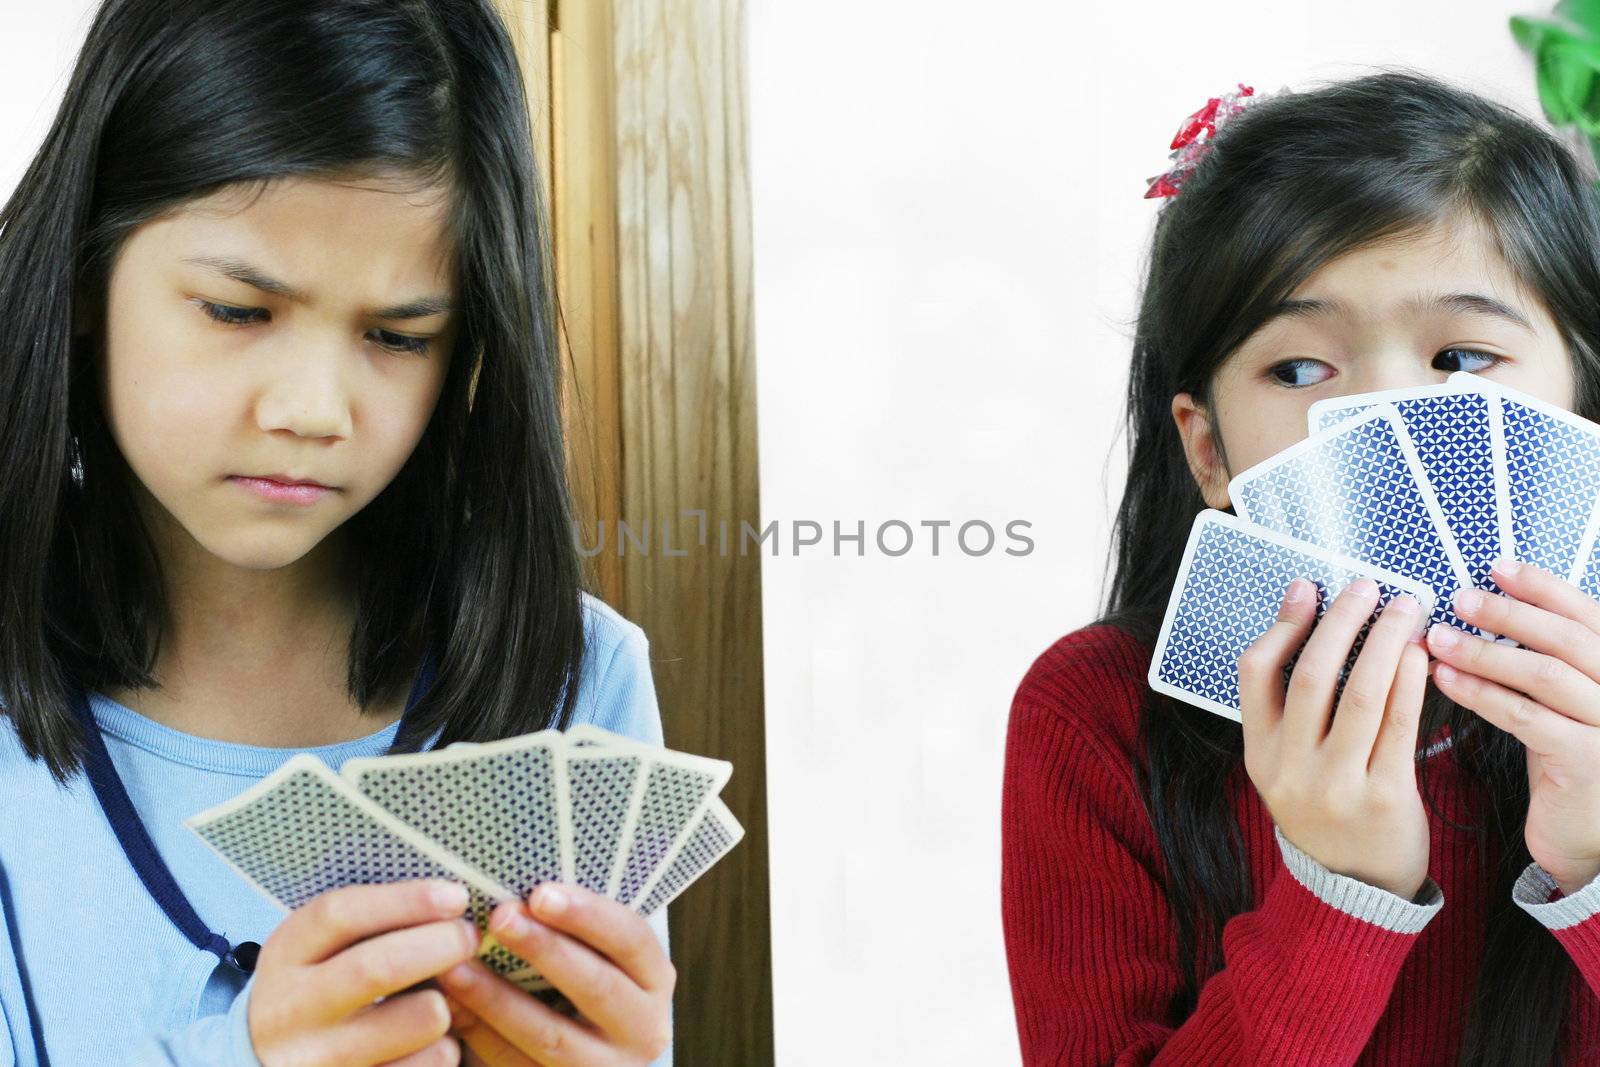 Two girls playing cards, one is cheating and looking at the other's hand